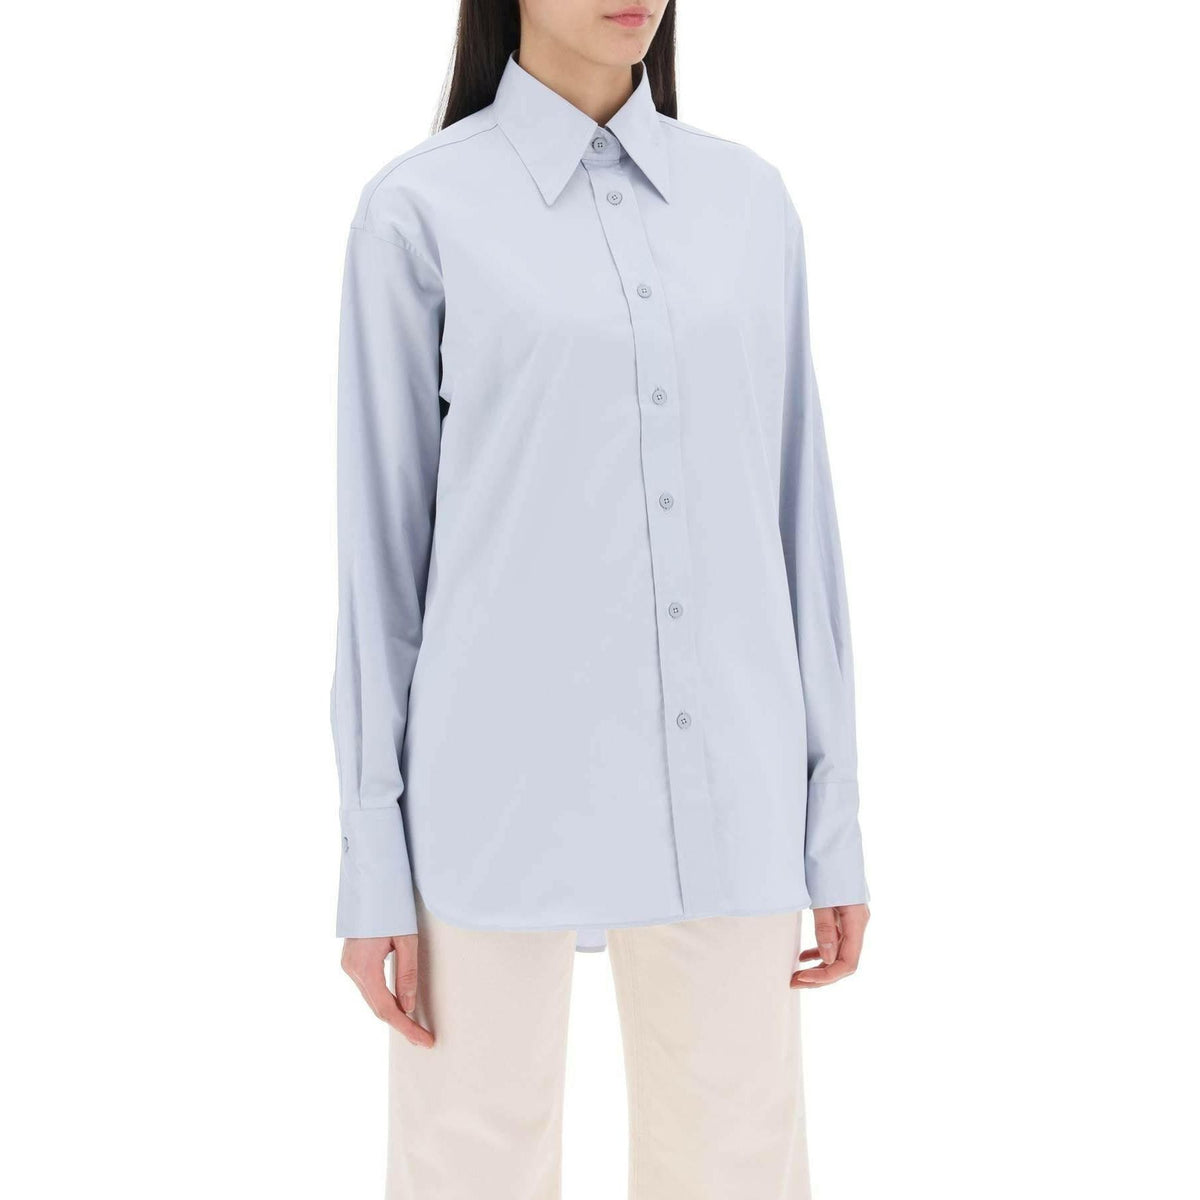 CLOSED - Relaxed Fit Shirt with Open Back Detail - JOHN JULIA